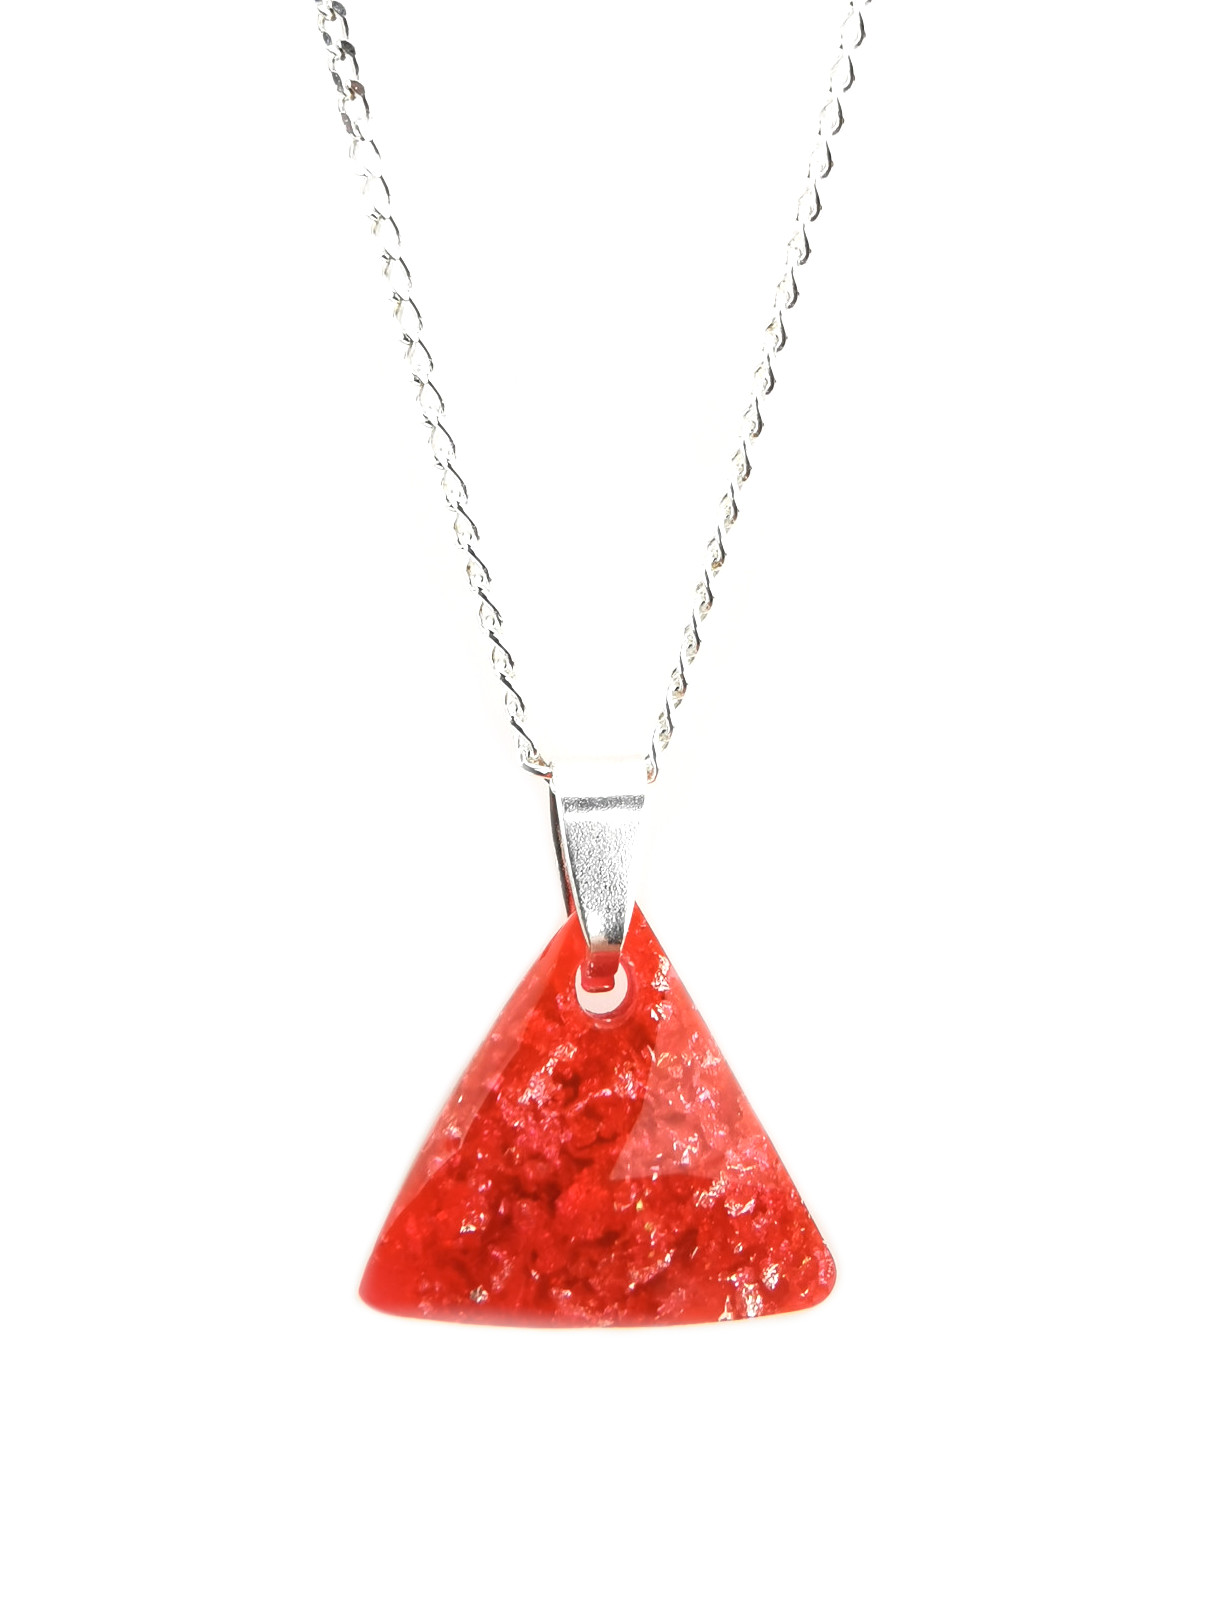 Red Triangle Orgone Pendant by OrgoneVibes